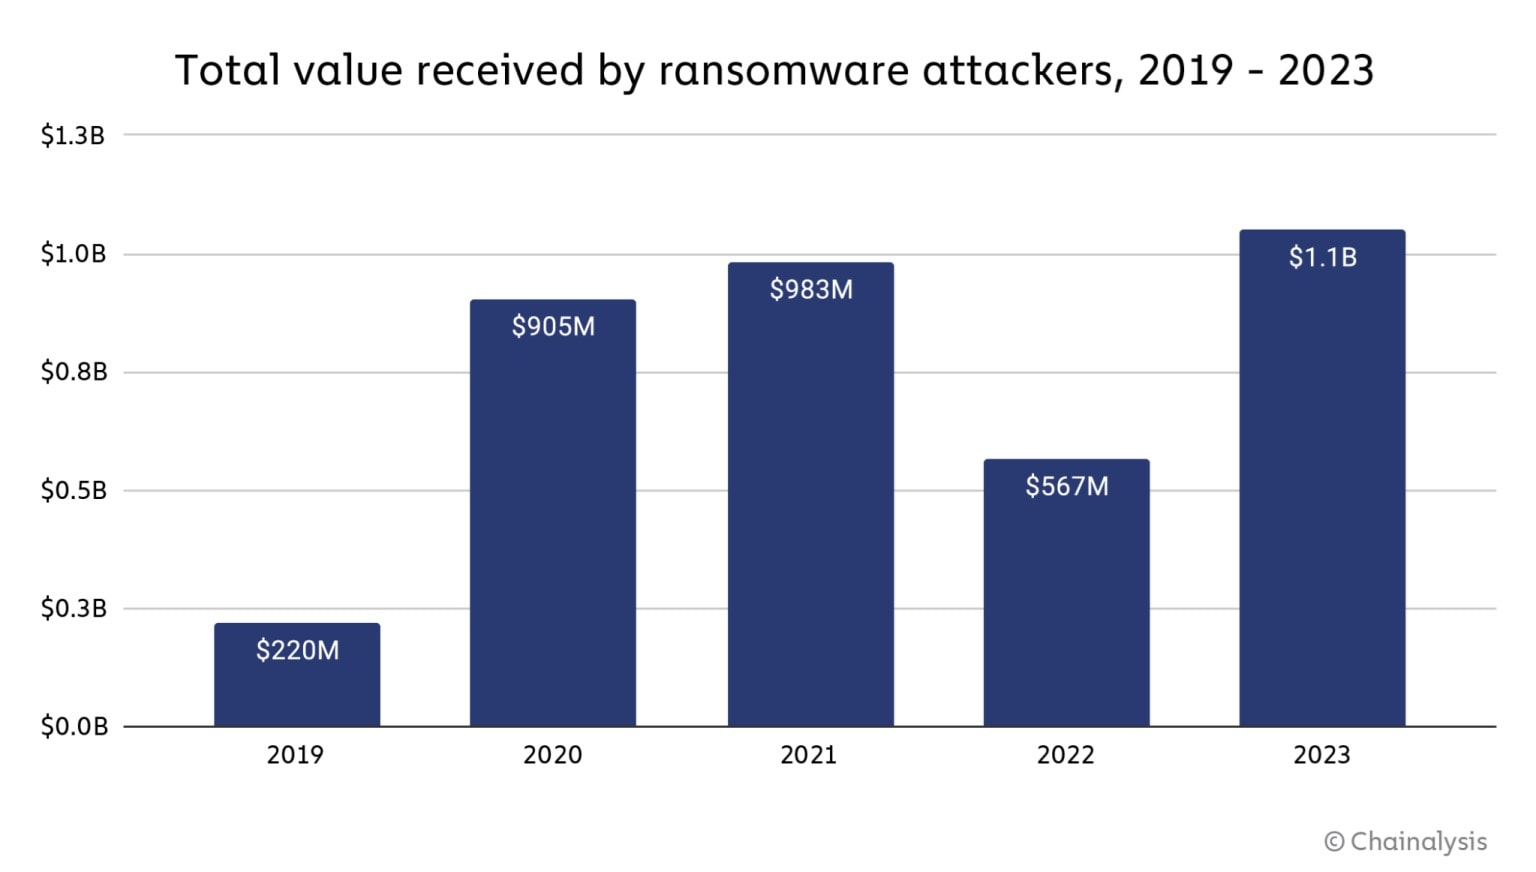 Ransomware Payments Soar to $1.1 Billion in 2023 Despite Prior Year’s Drop